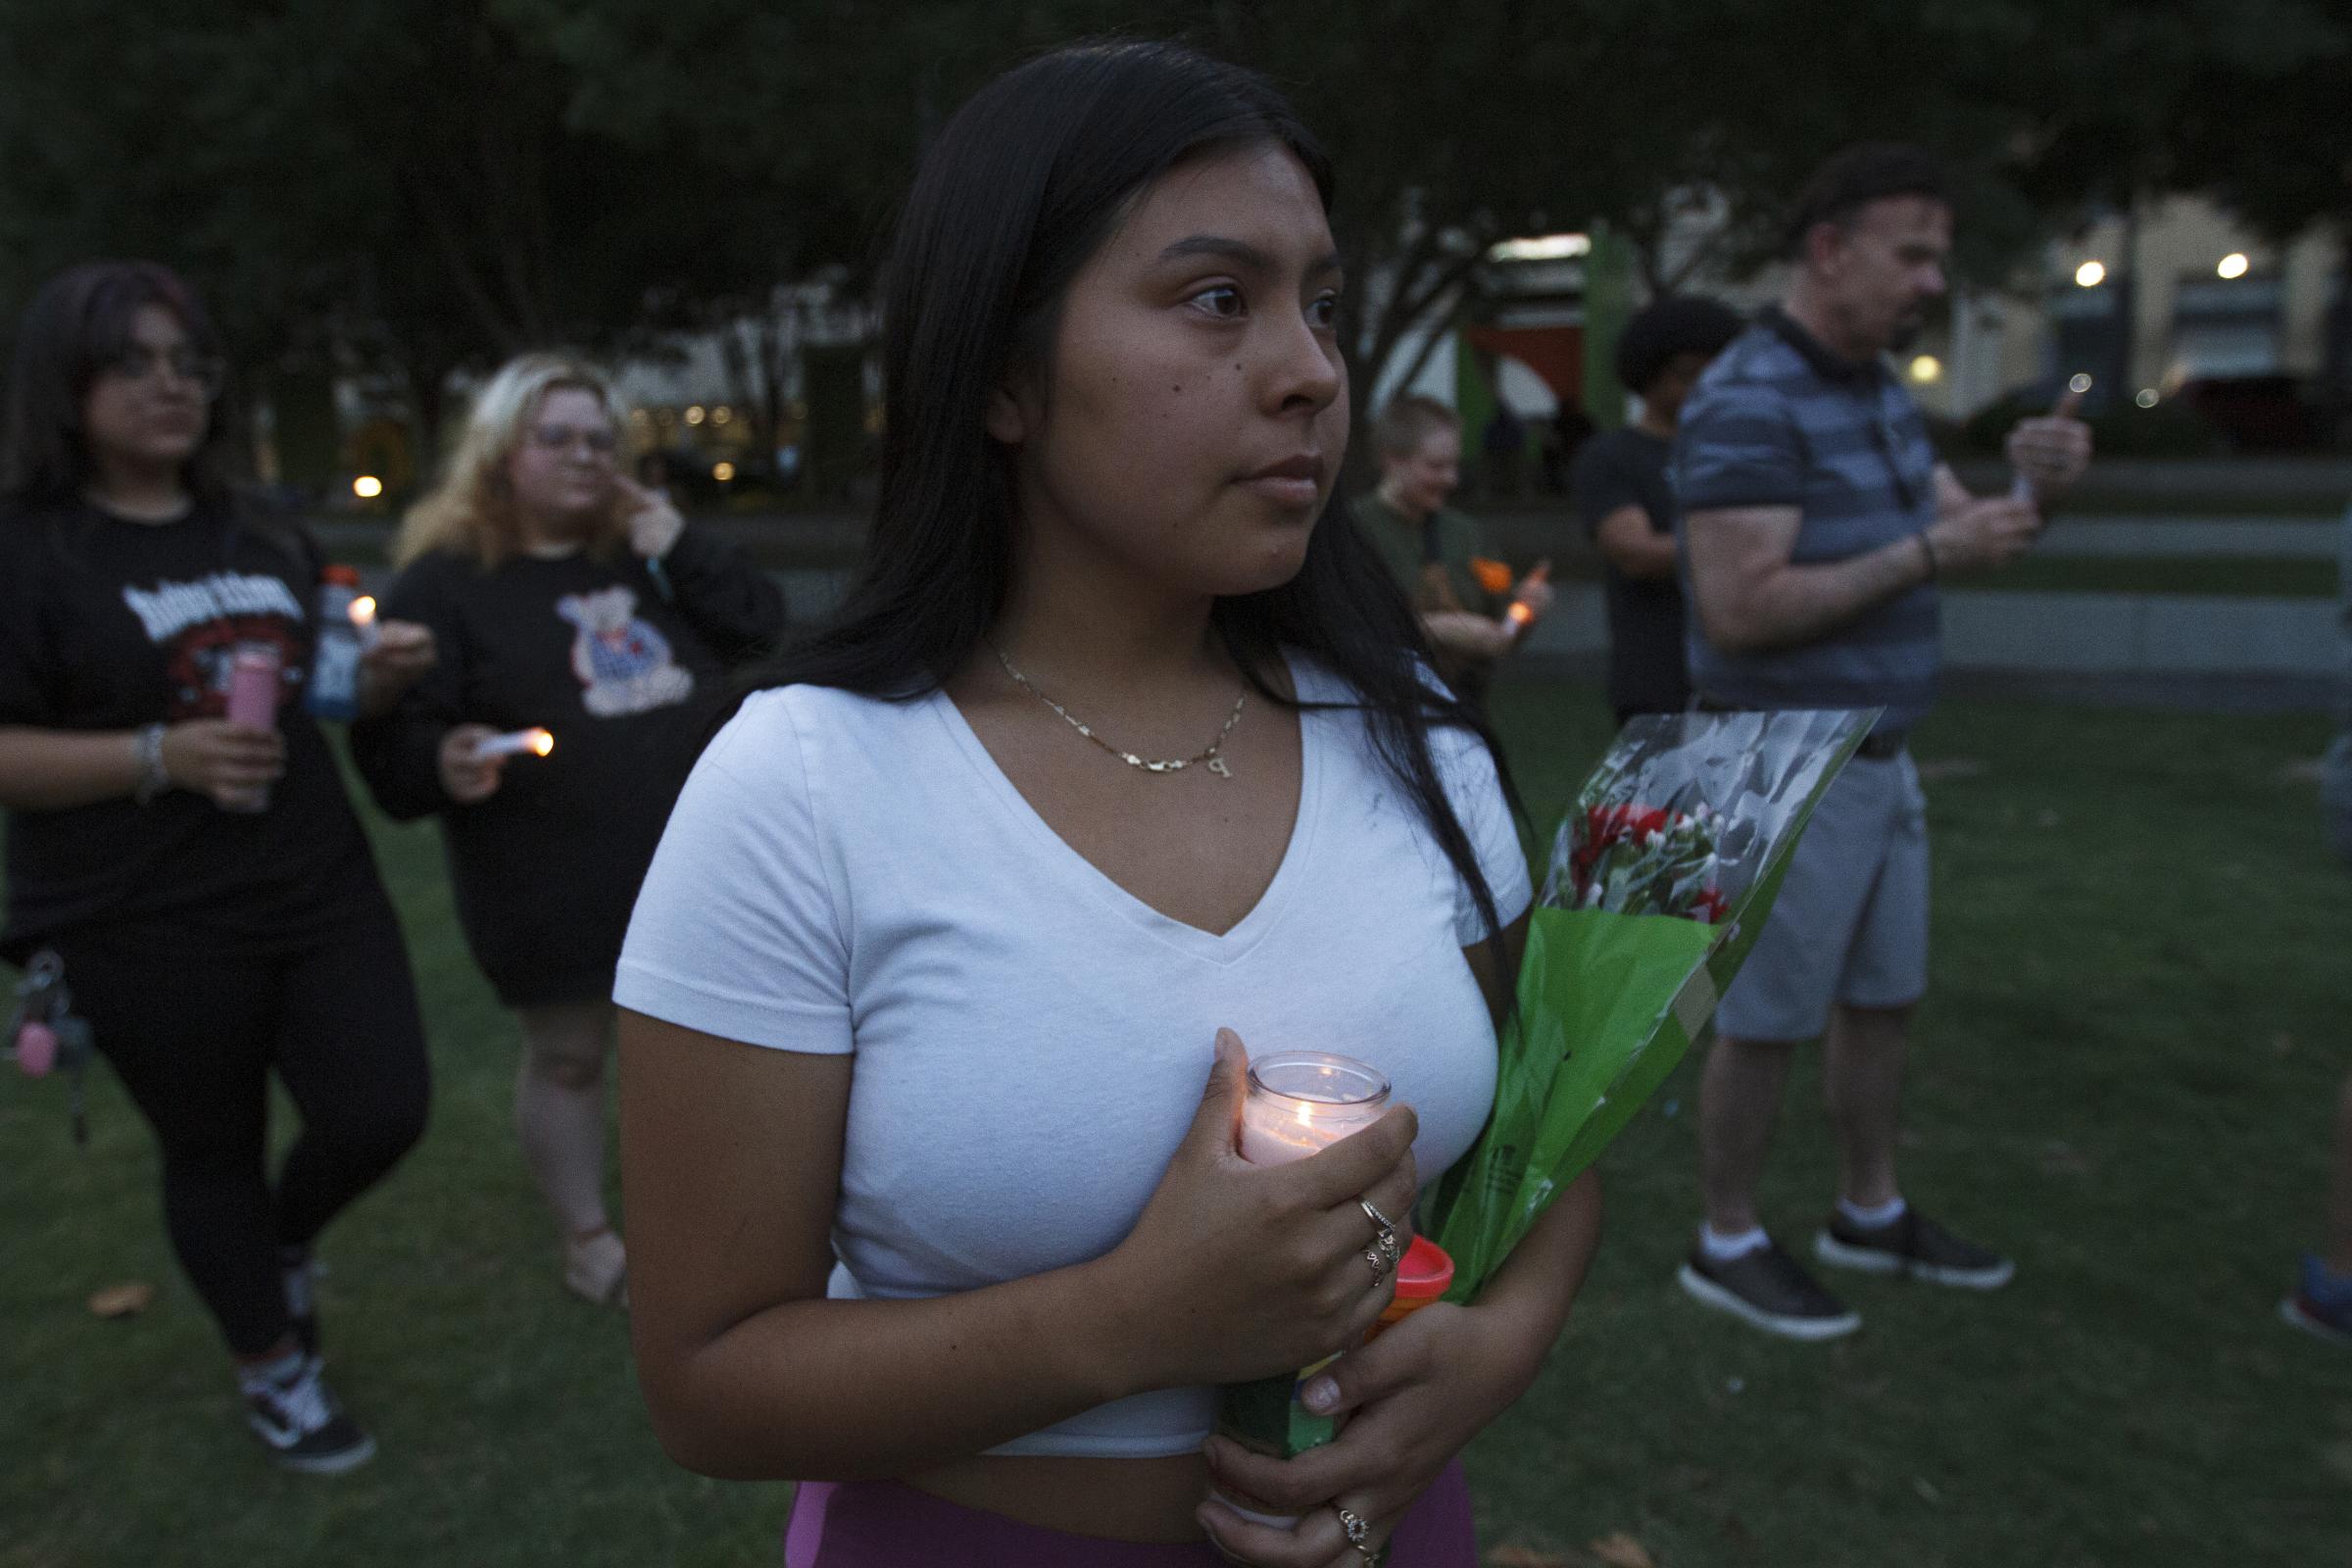 Candlelight Vigil for the Buffalo and Uvalde gun violence victims - Lindsey Rodriguez takes part in the candlelight vigil held at Main Street Garden in downtown...